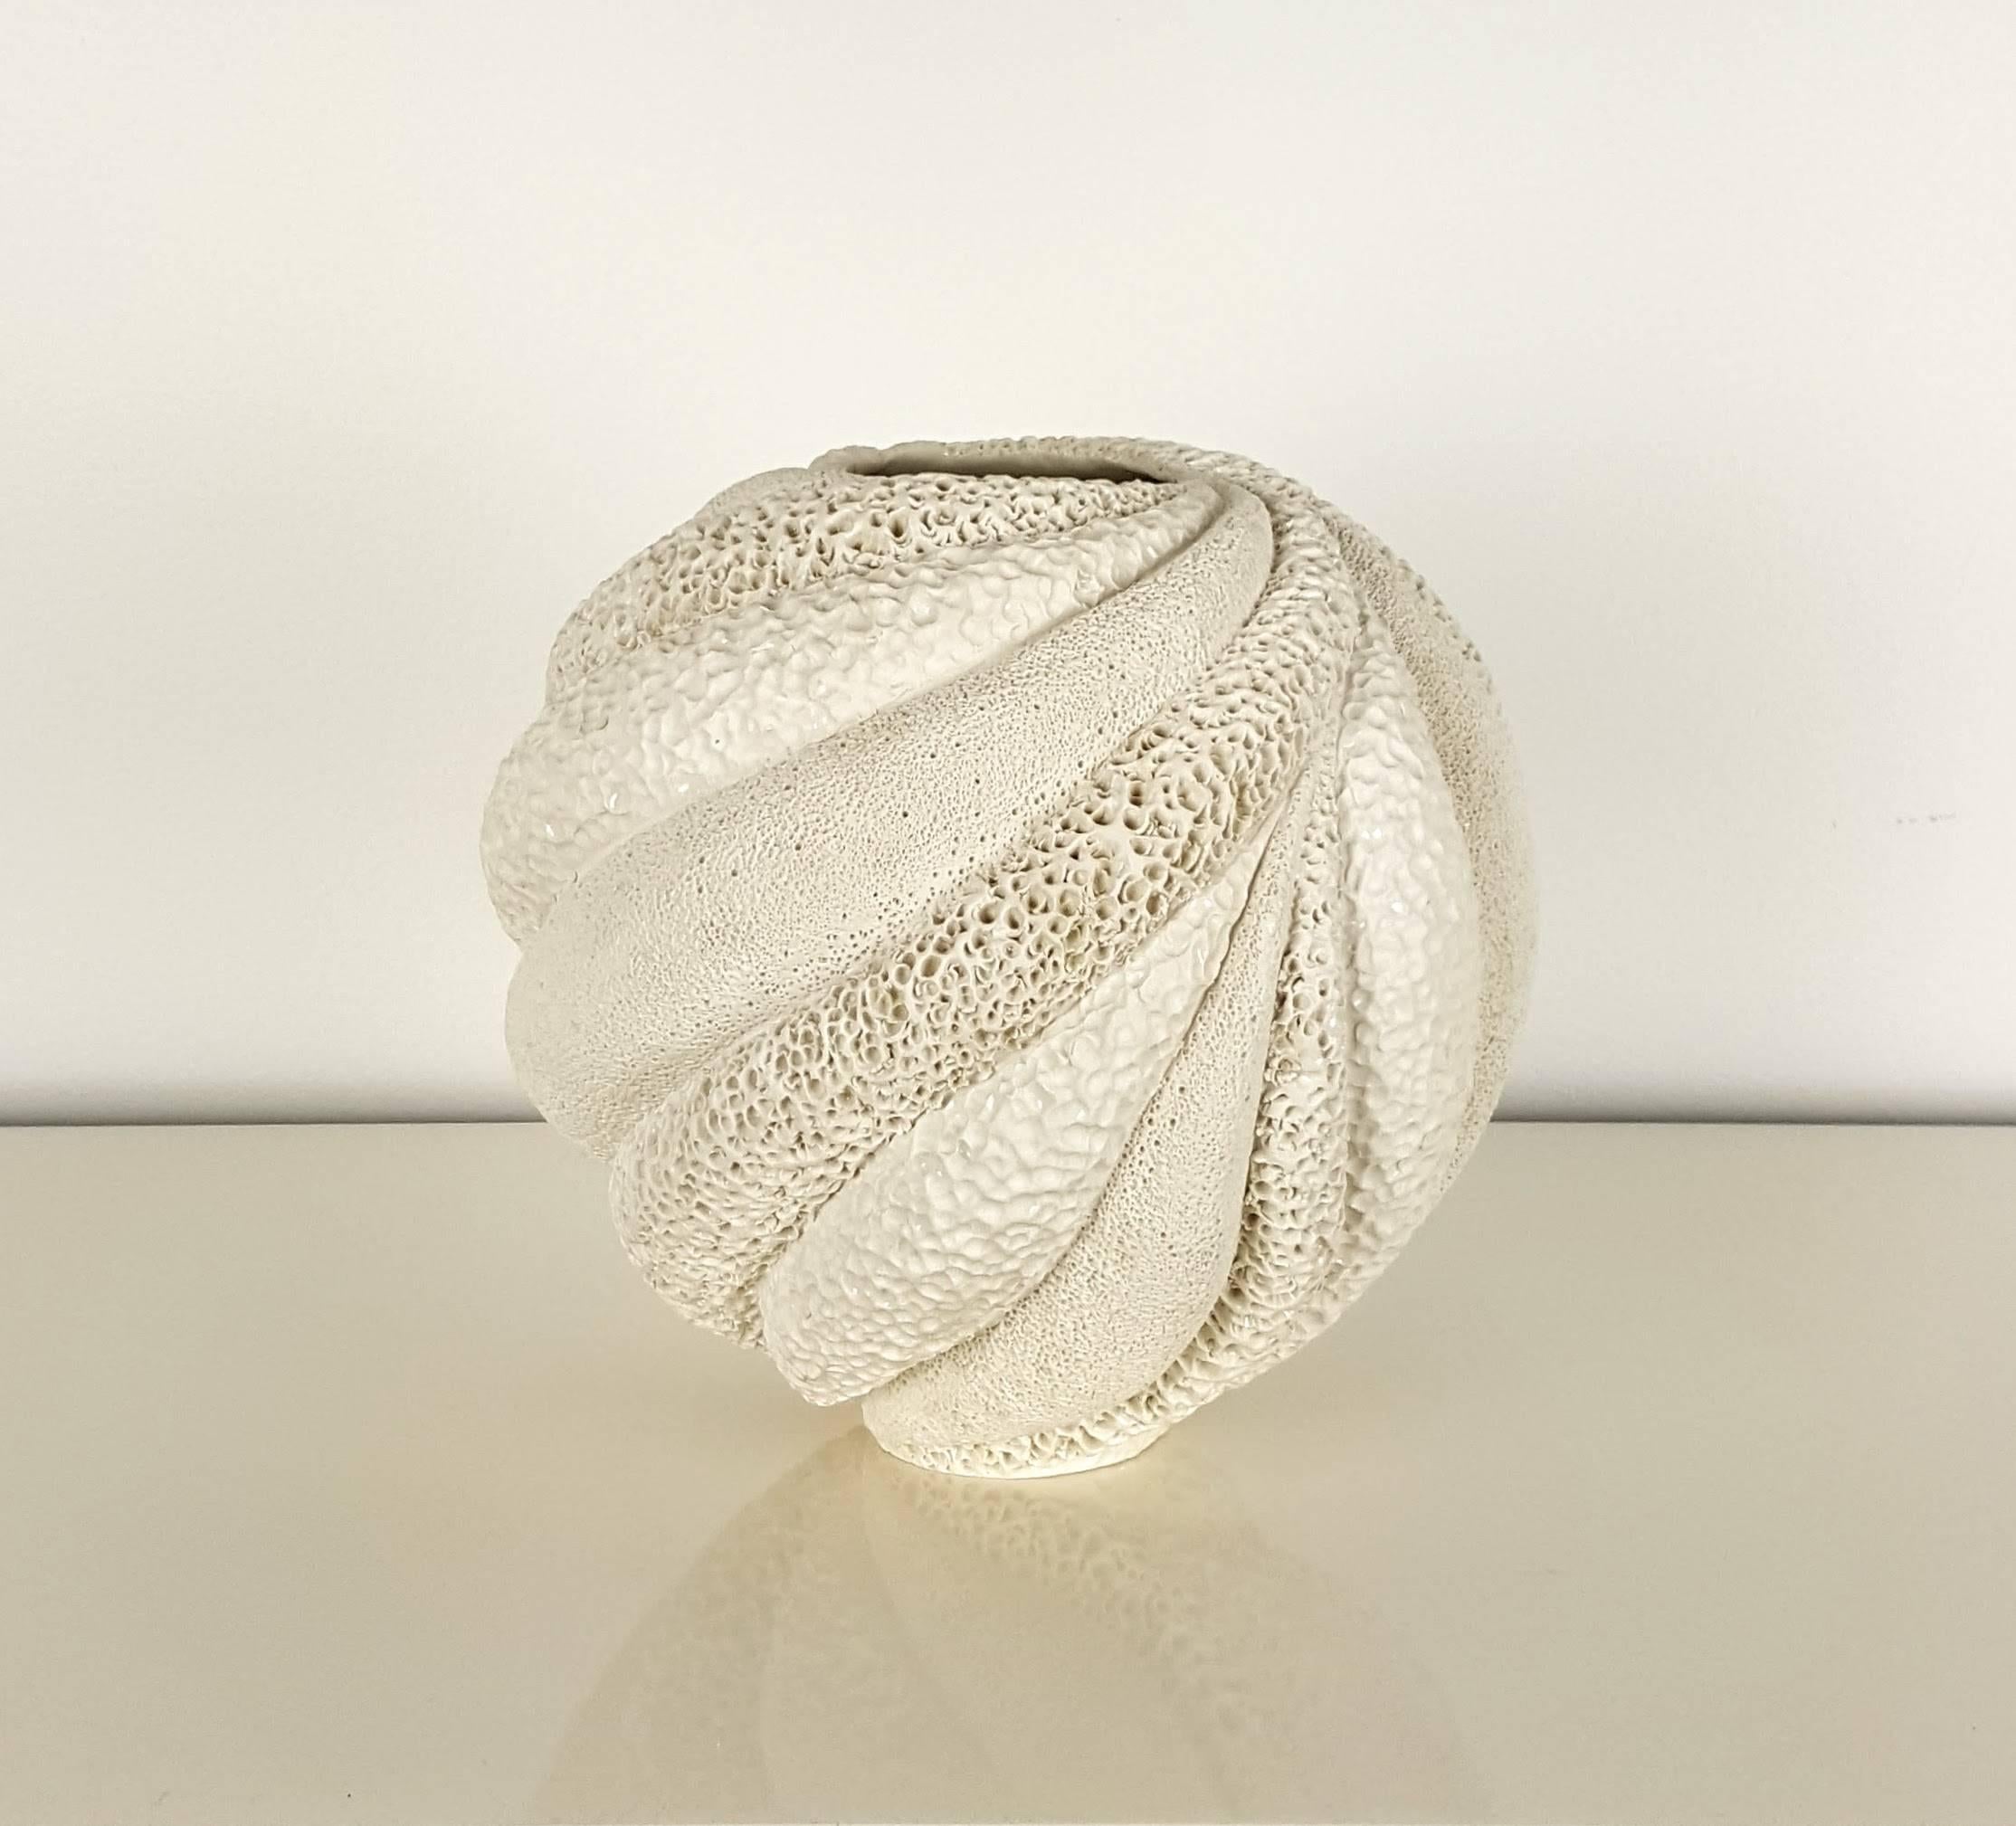 Creamy white medium round coastal collage vessel by Judi Tavill, 2016. Hand thrown. The carved pieces are created with thick walls, deeply carved, and painstakingly textured by hand. Pieces are coated with porcelain slip and further textured. After